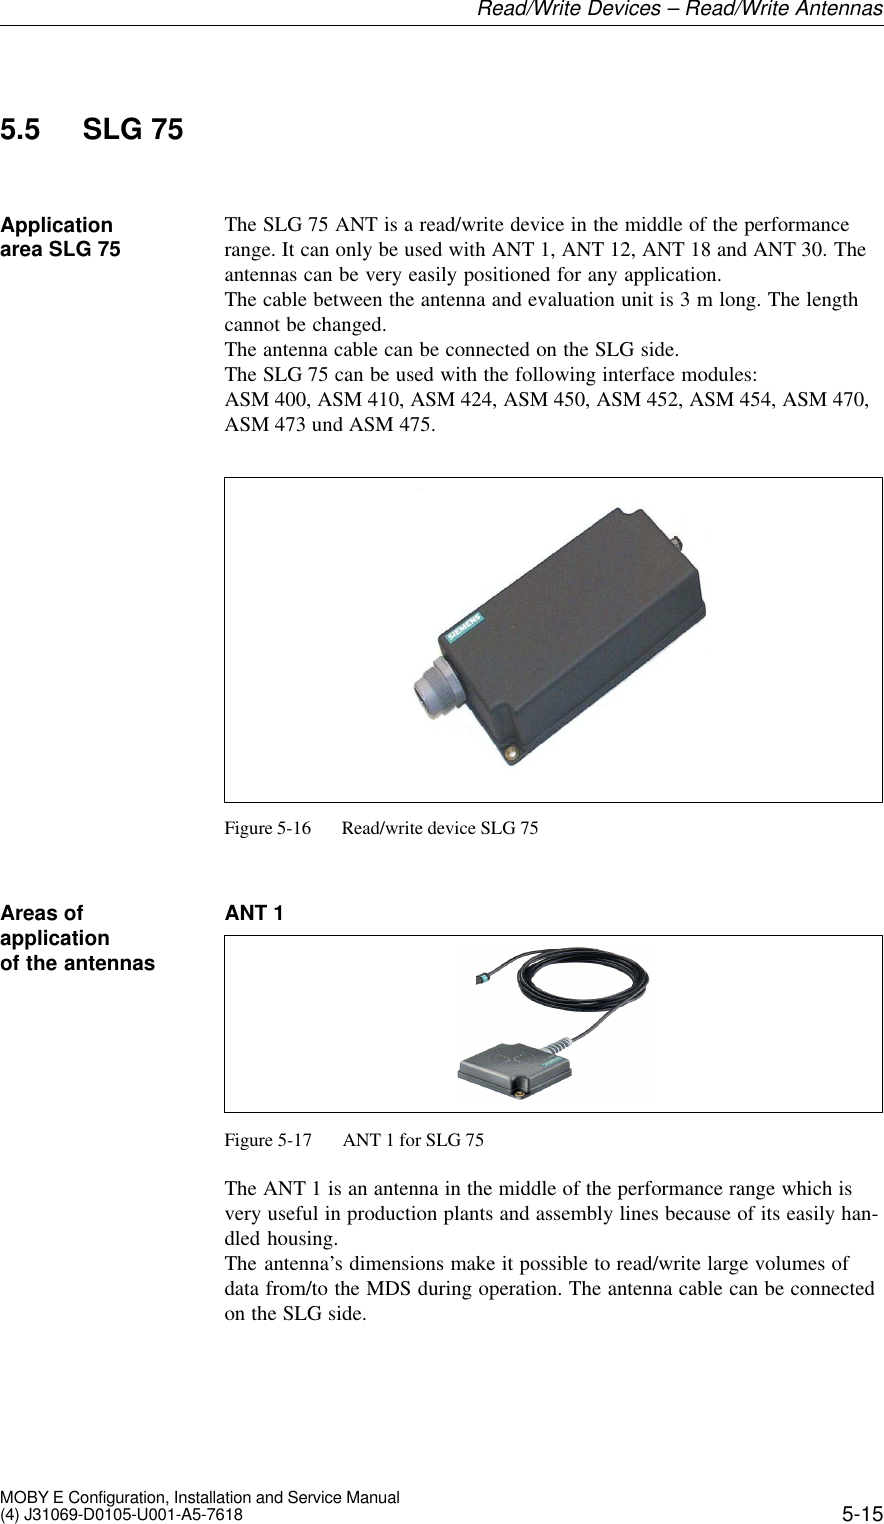 5-15MOBY E Configuration, Installation and Service Manual(4) J31069-D0105-U001-A5-76185.5 SLG 75The SLG 75 ANT is a read/write device in the middle of the performancerange. It can only be used with ANT 1, ANT 12, ANT 18 and ANT 30. Theantennas can be very easily positioned for any application.The cable between the antenna and evaluation unit is 3 m long. The lengthcannot be changed. The antenna cable can be connected on the SLG side.The SLG 75 can be used with the following interface modules: ASM 400, ASM 410, ASM 424, ASM 450, ASM 452, ASM 454, ASM 470,ASM 473 und ASM 475.Figure 5-16 Read/write device SLG 75ANT 1Figure 5-17 ANT 1 for SLG 75The ANT 1 is an antenna in the middle of the performance range which isvery useful in production plants and assembly lines because of its easily han-dled housing.The antenna’s dimensions make it possible to read/write large volumes ofdata from/to the MDS during operation. The antenna cable can be connectedon the SLG side.Applicationarea SLG 75Areas ofapplicationof the antennasRead/Write Devices – Read/Write Antennas